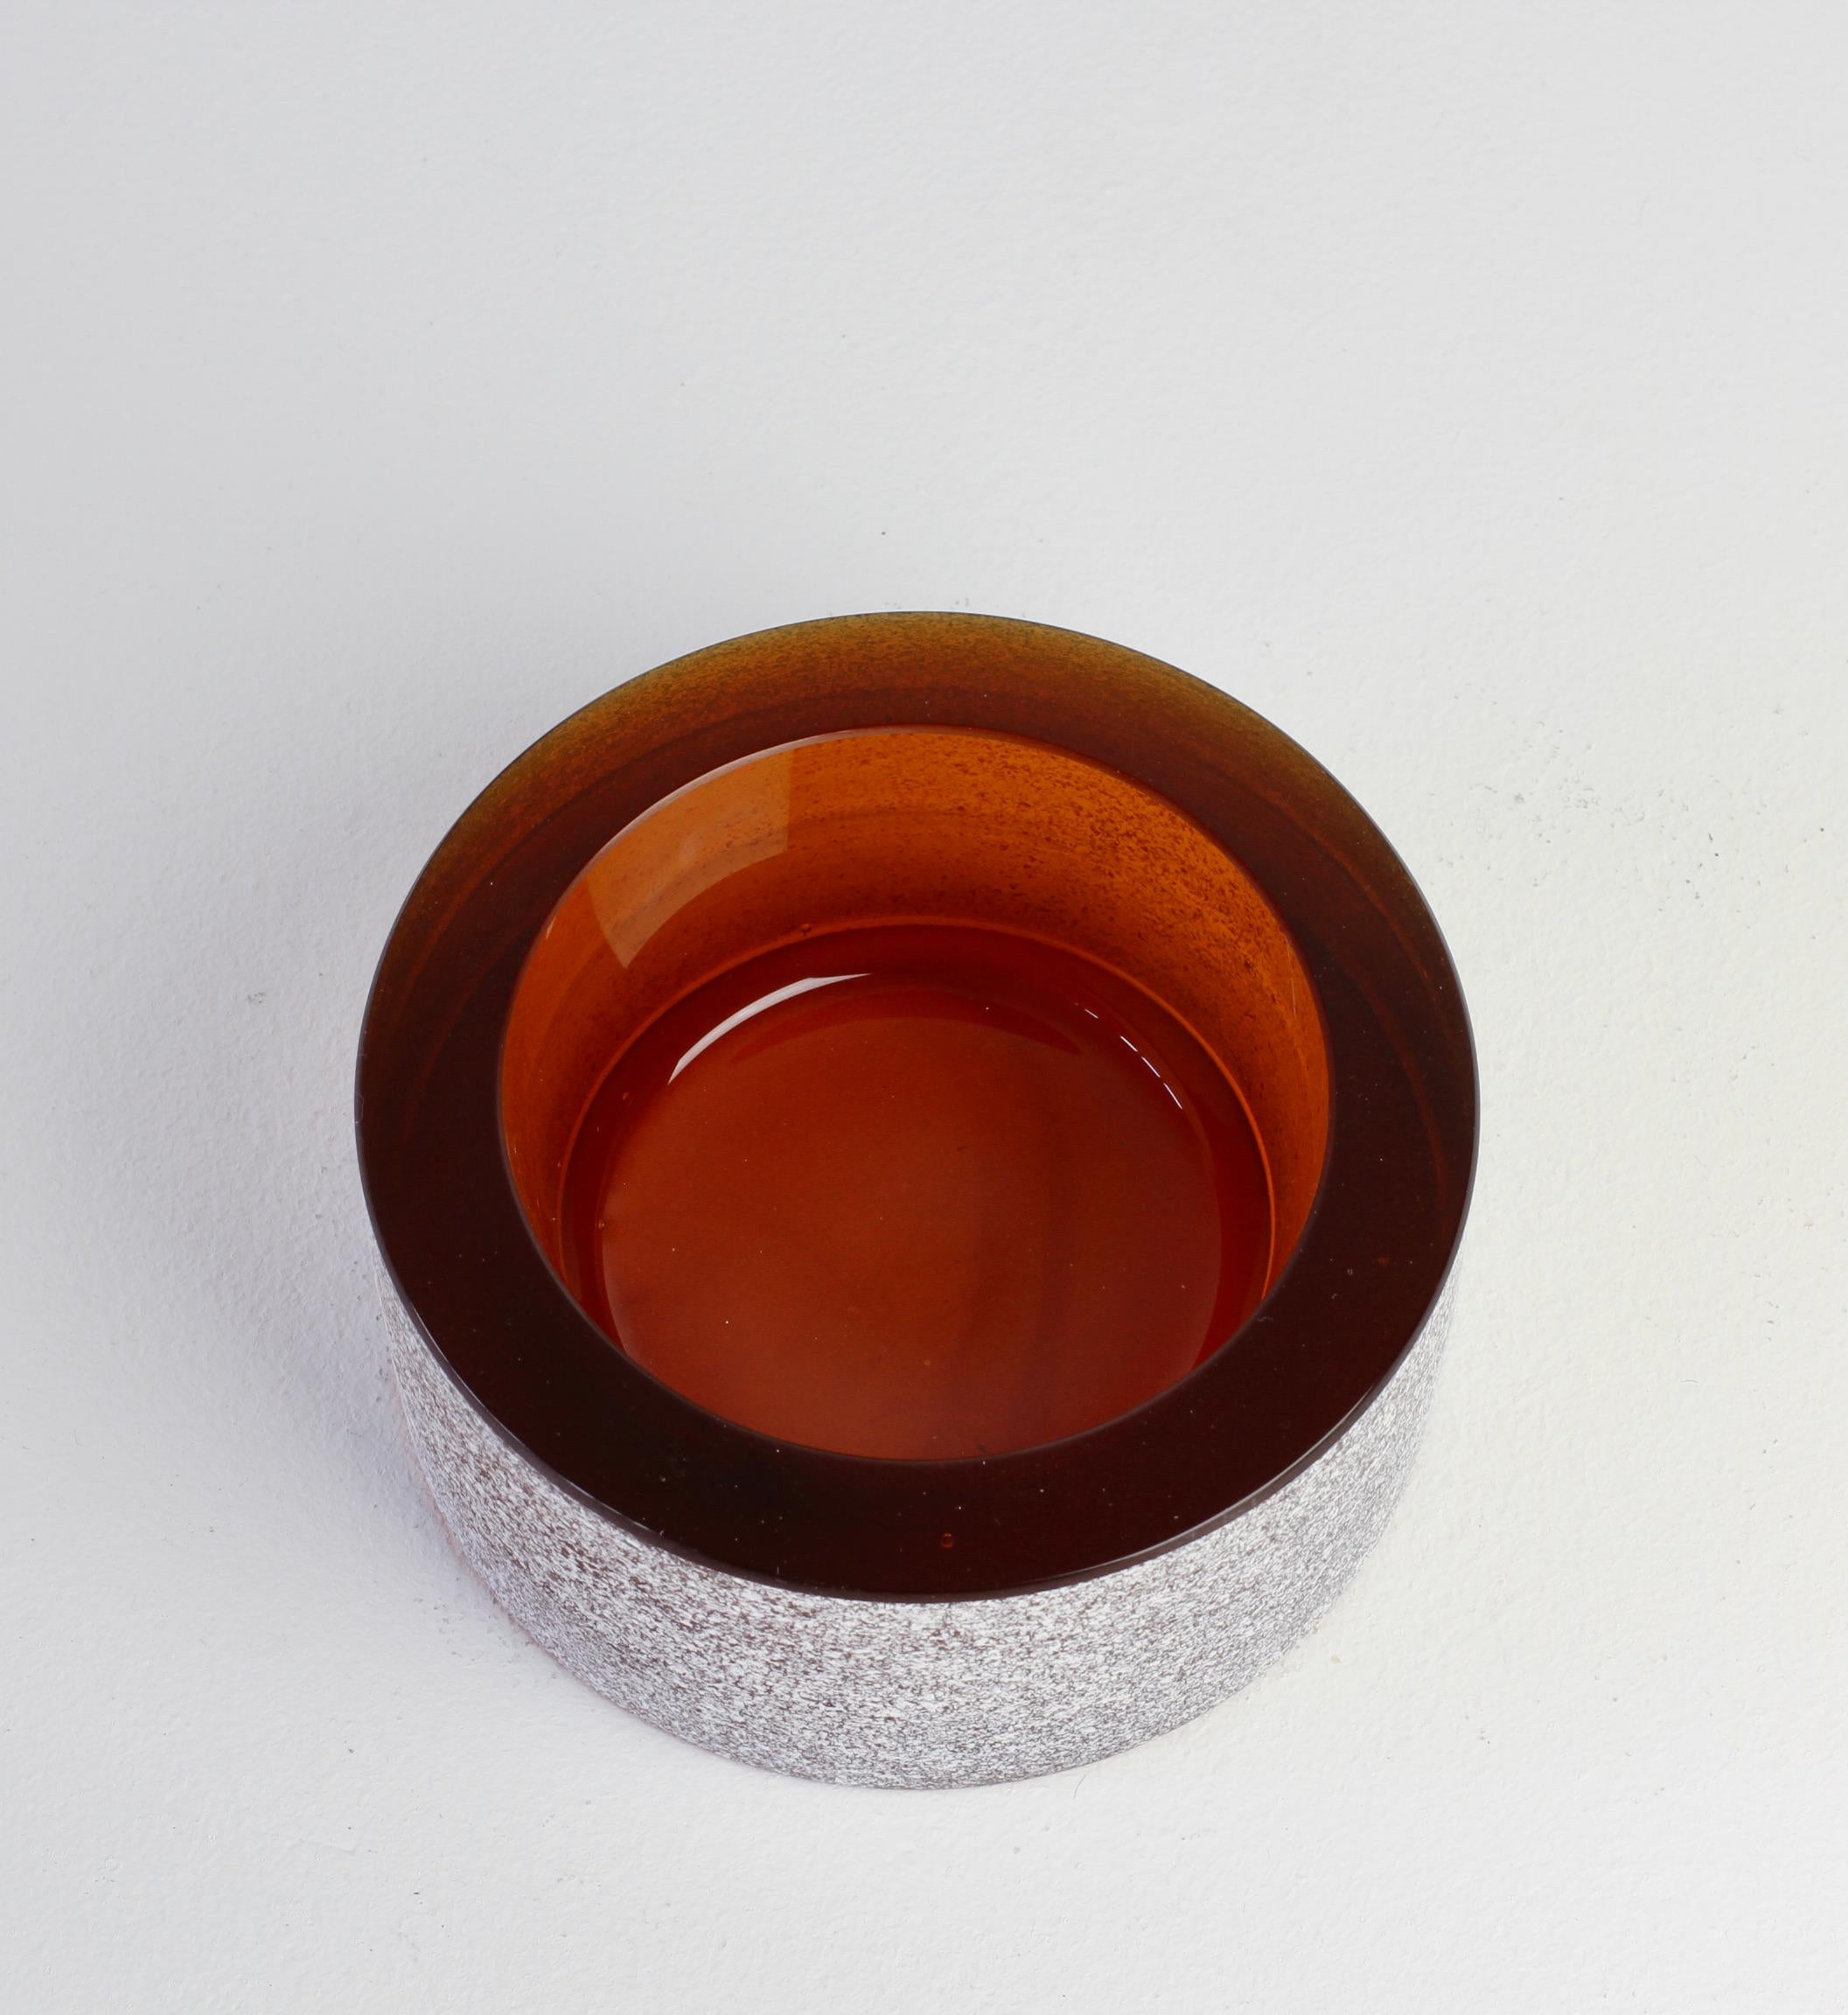 20th Century Seguso Vintage Thick Round Amber 'Scavo' Murano Glass Bowl or Ashtray, C. 1980s For Sale